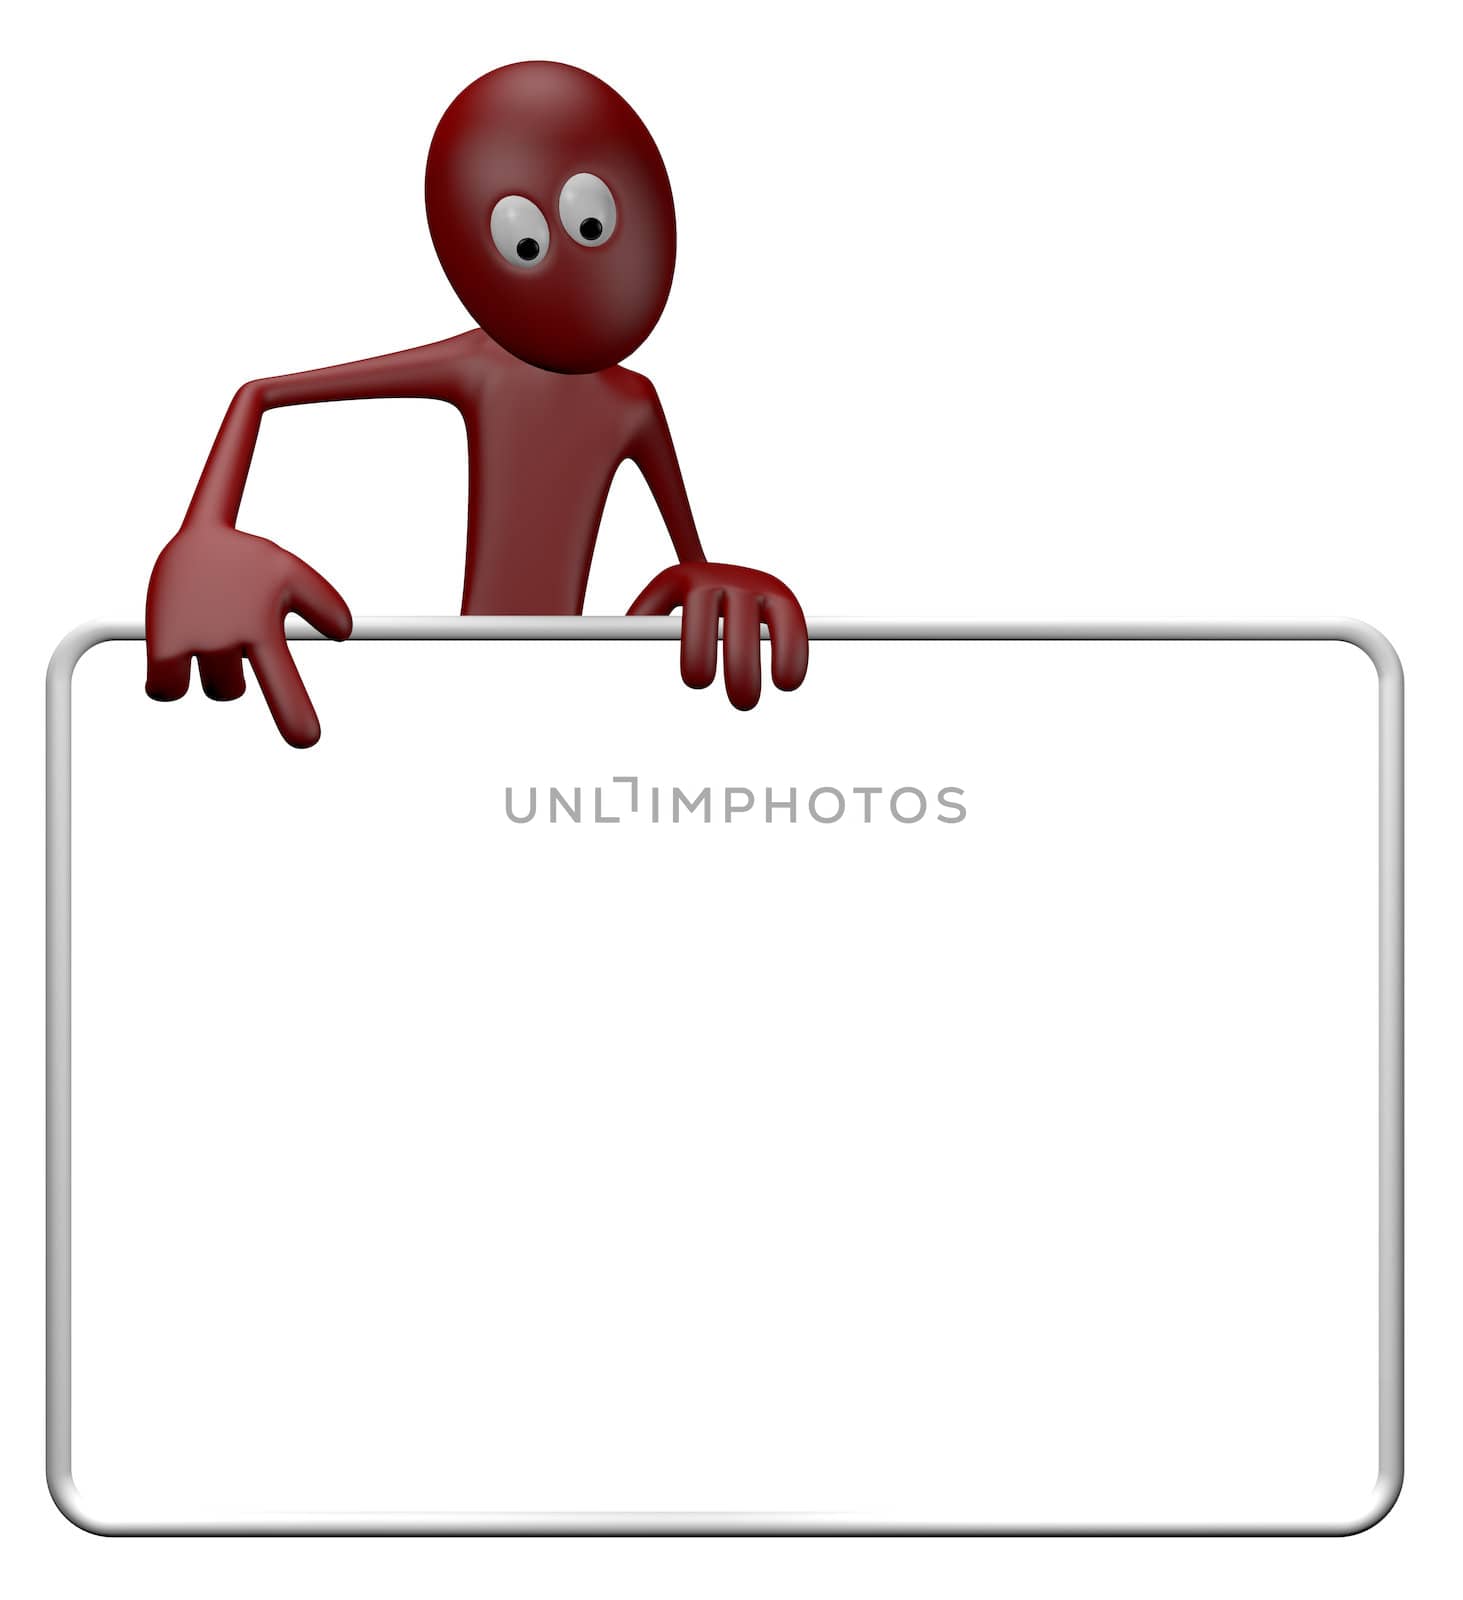 cartoon guy and blank white sign - 3d illustration